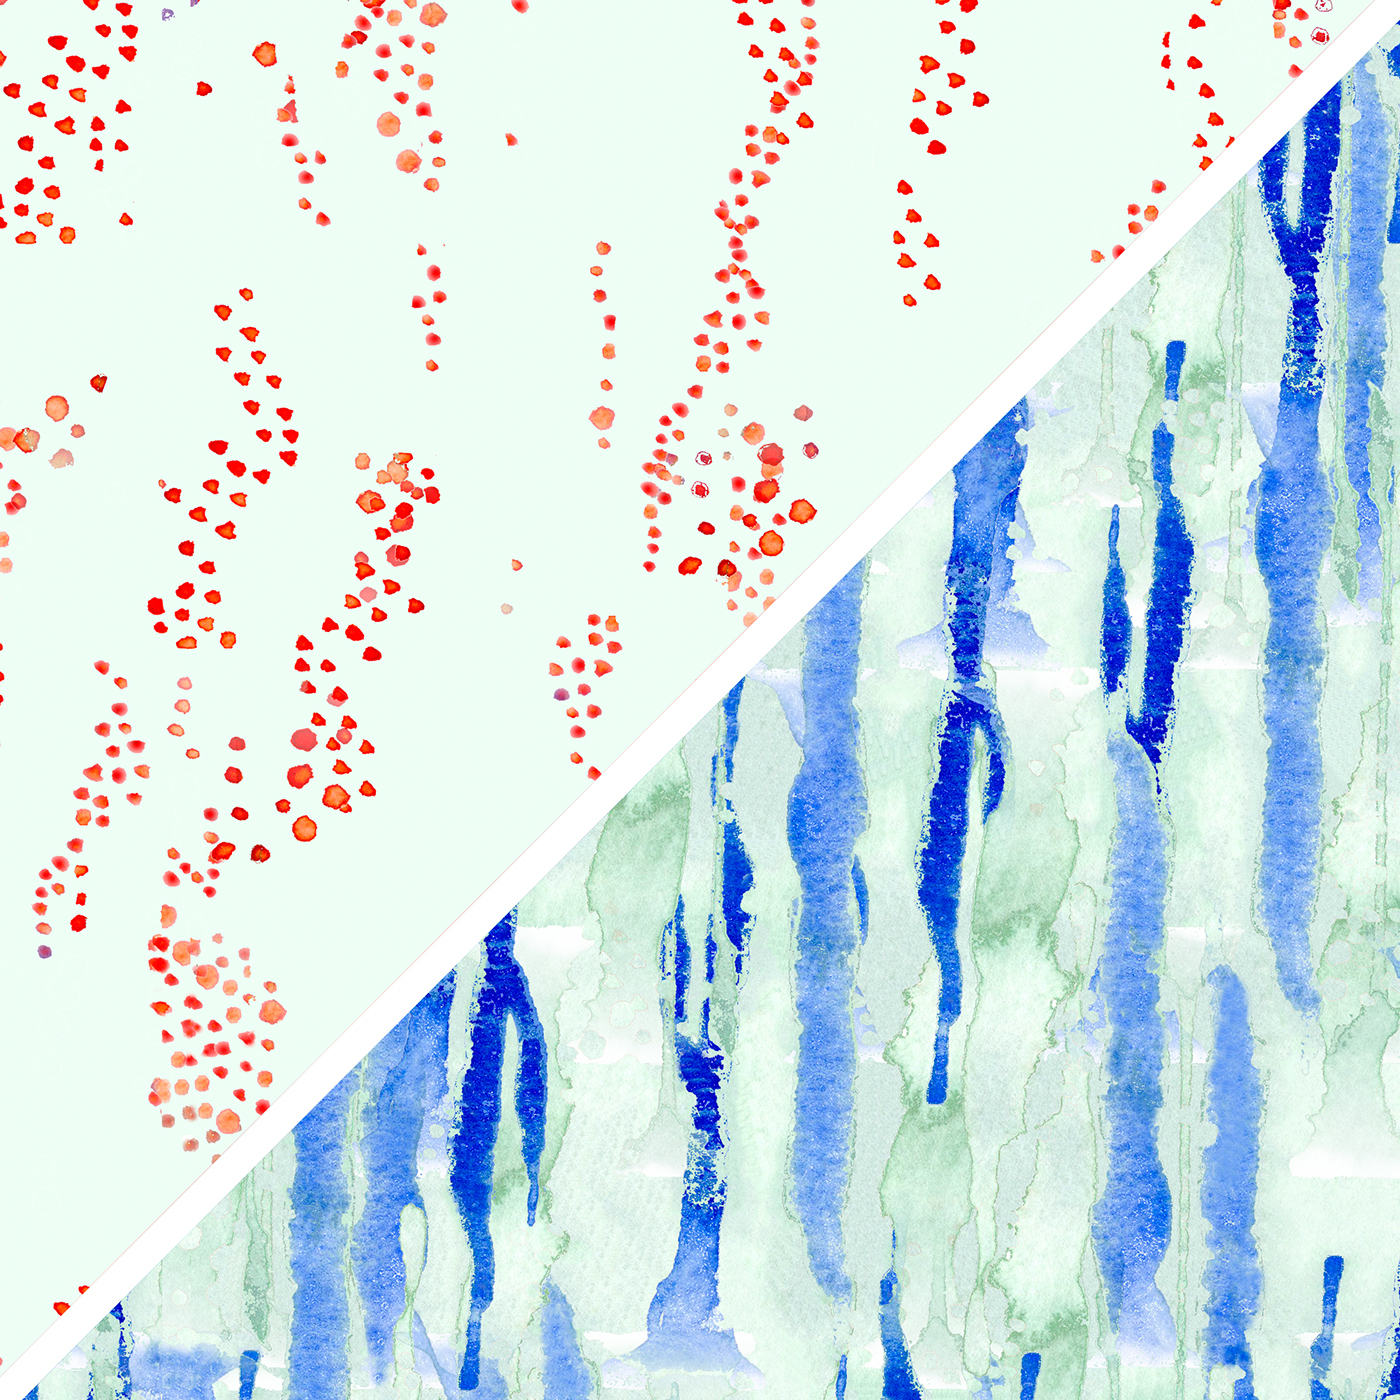 repeat Fashion  Interior pattern print fibers textile Repeat Pattern watercolor Hand Painted